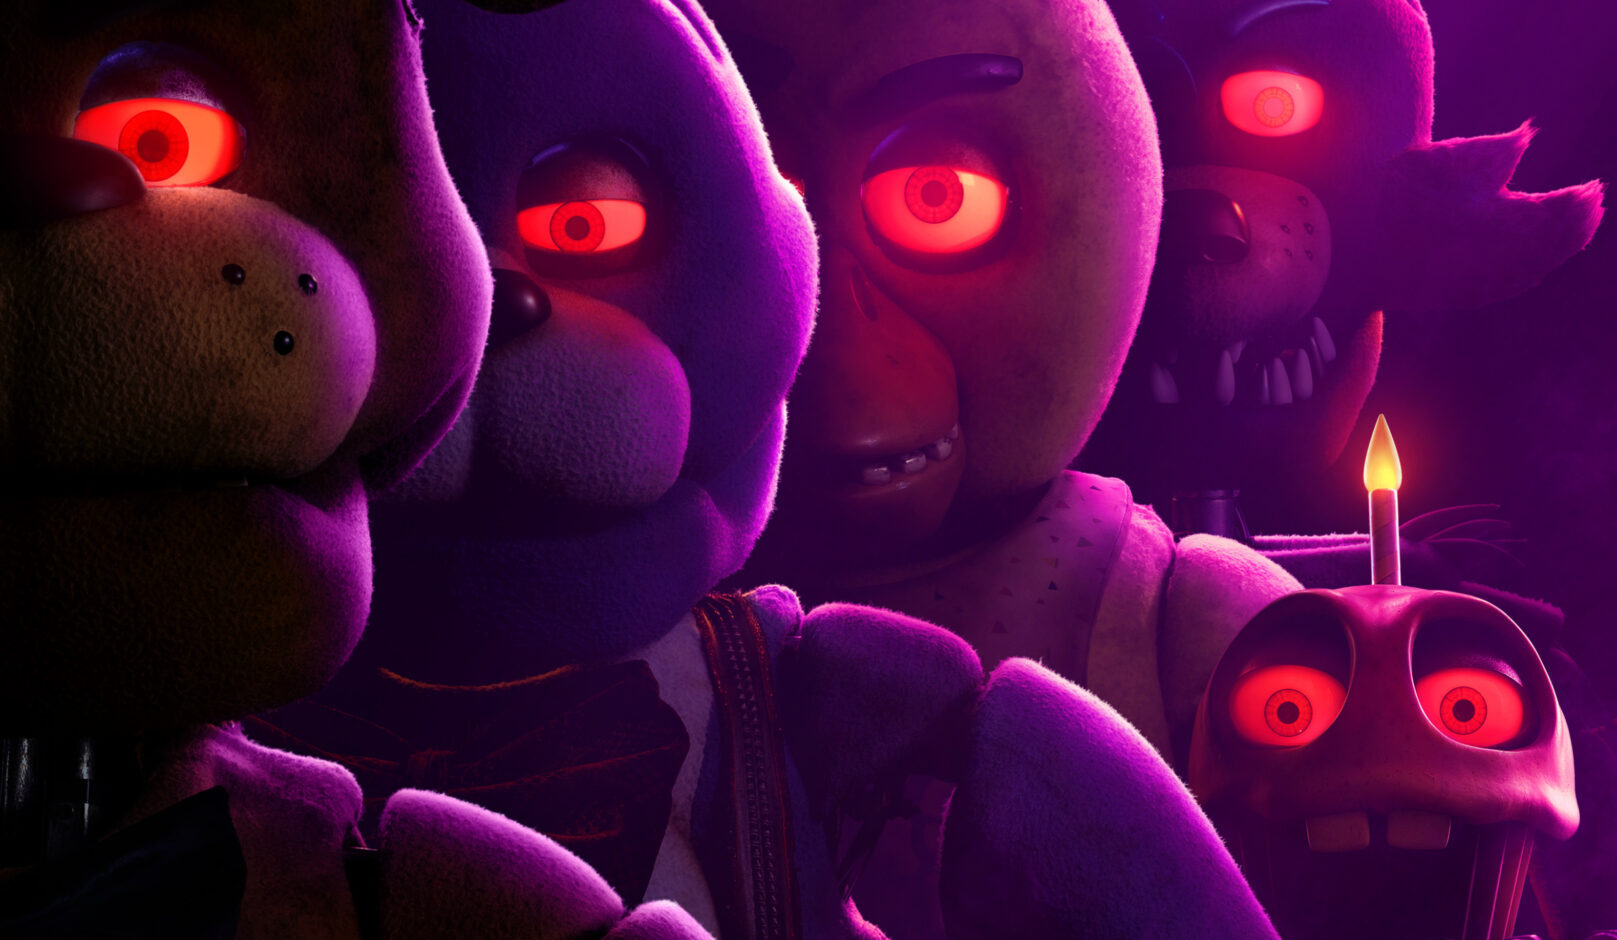 Check Out The Teaser Trailer For Five Nights At Freddy’s